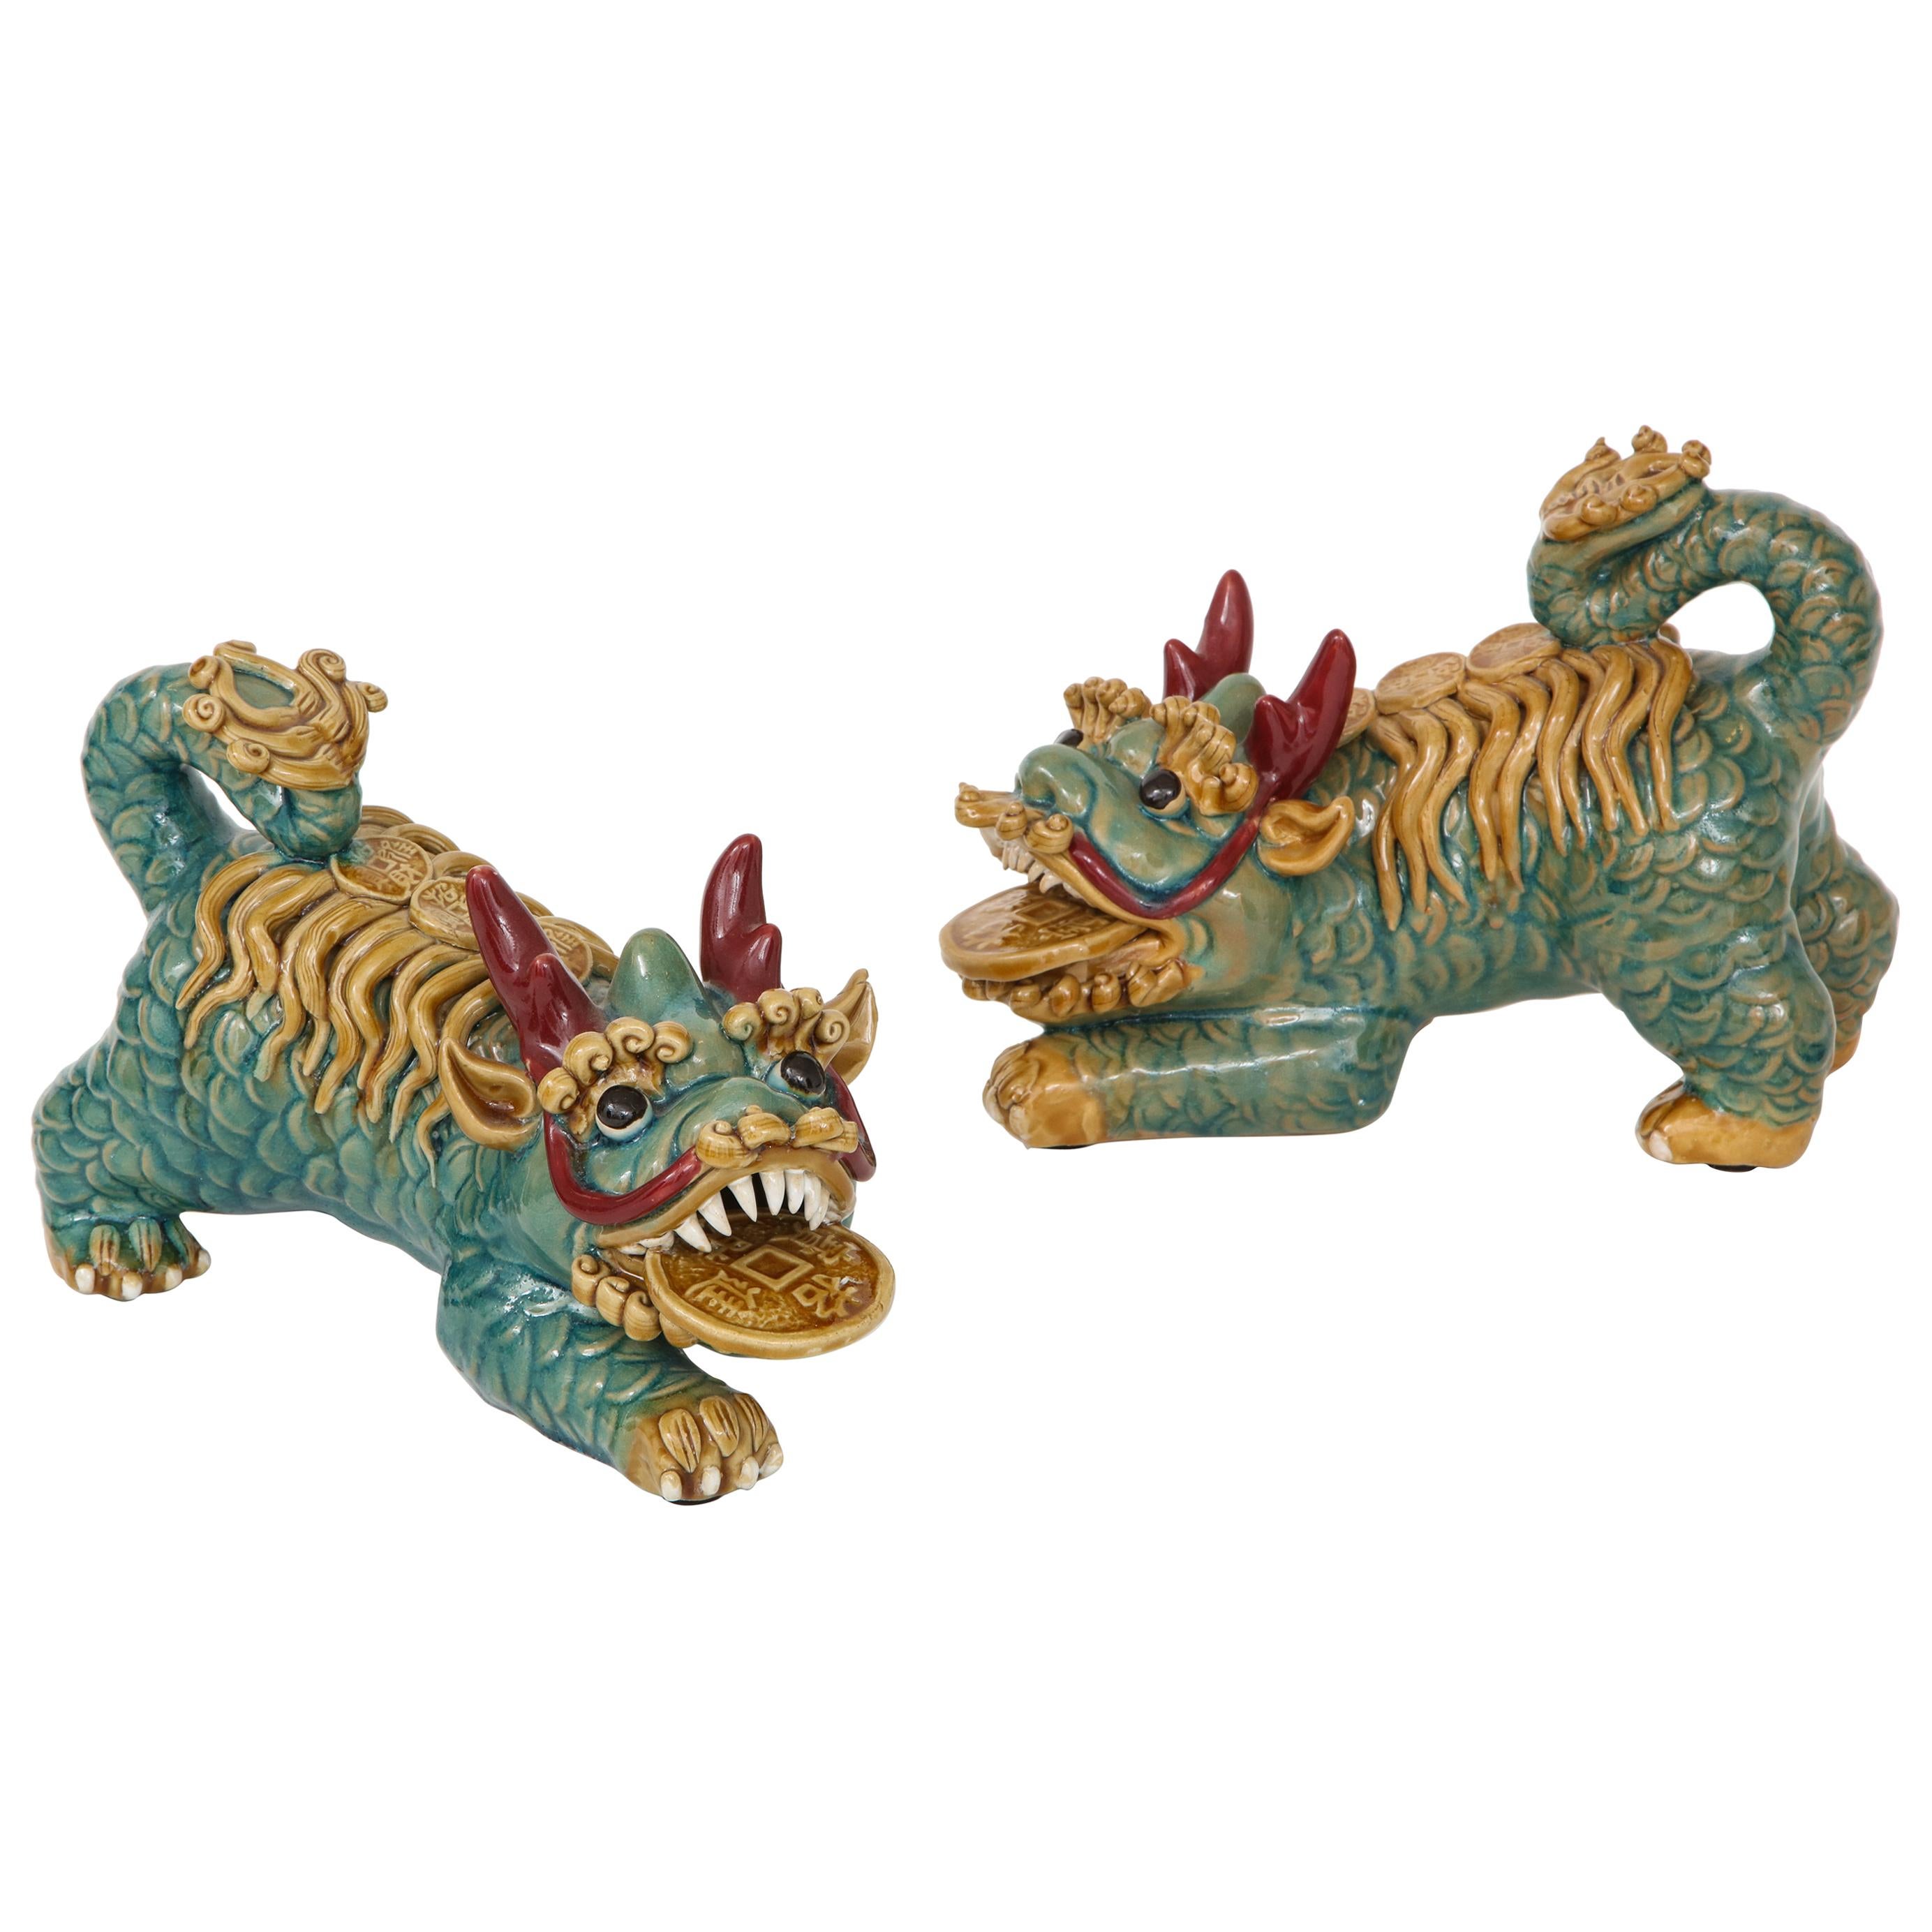 Midcentury Chinese Porcelain Foo Dogs